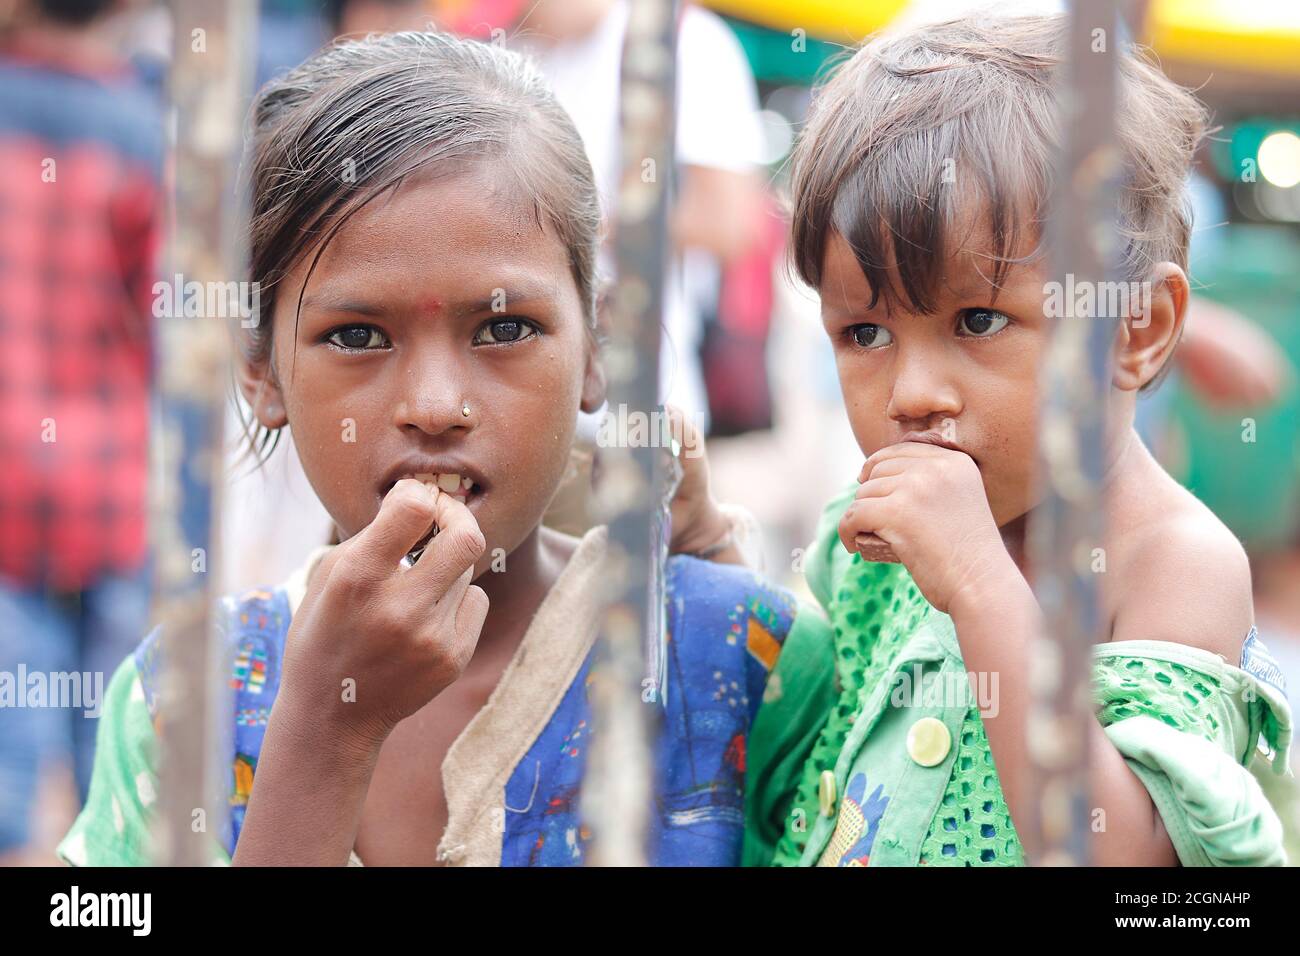 Ahemdabad, Gujarat, India - 20th june, 2019: Poor indian helpless street girl holding little kid in hand looks at camera, seeking help, poverty concep Stock Photo